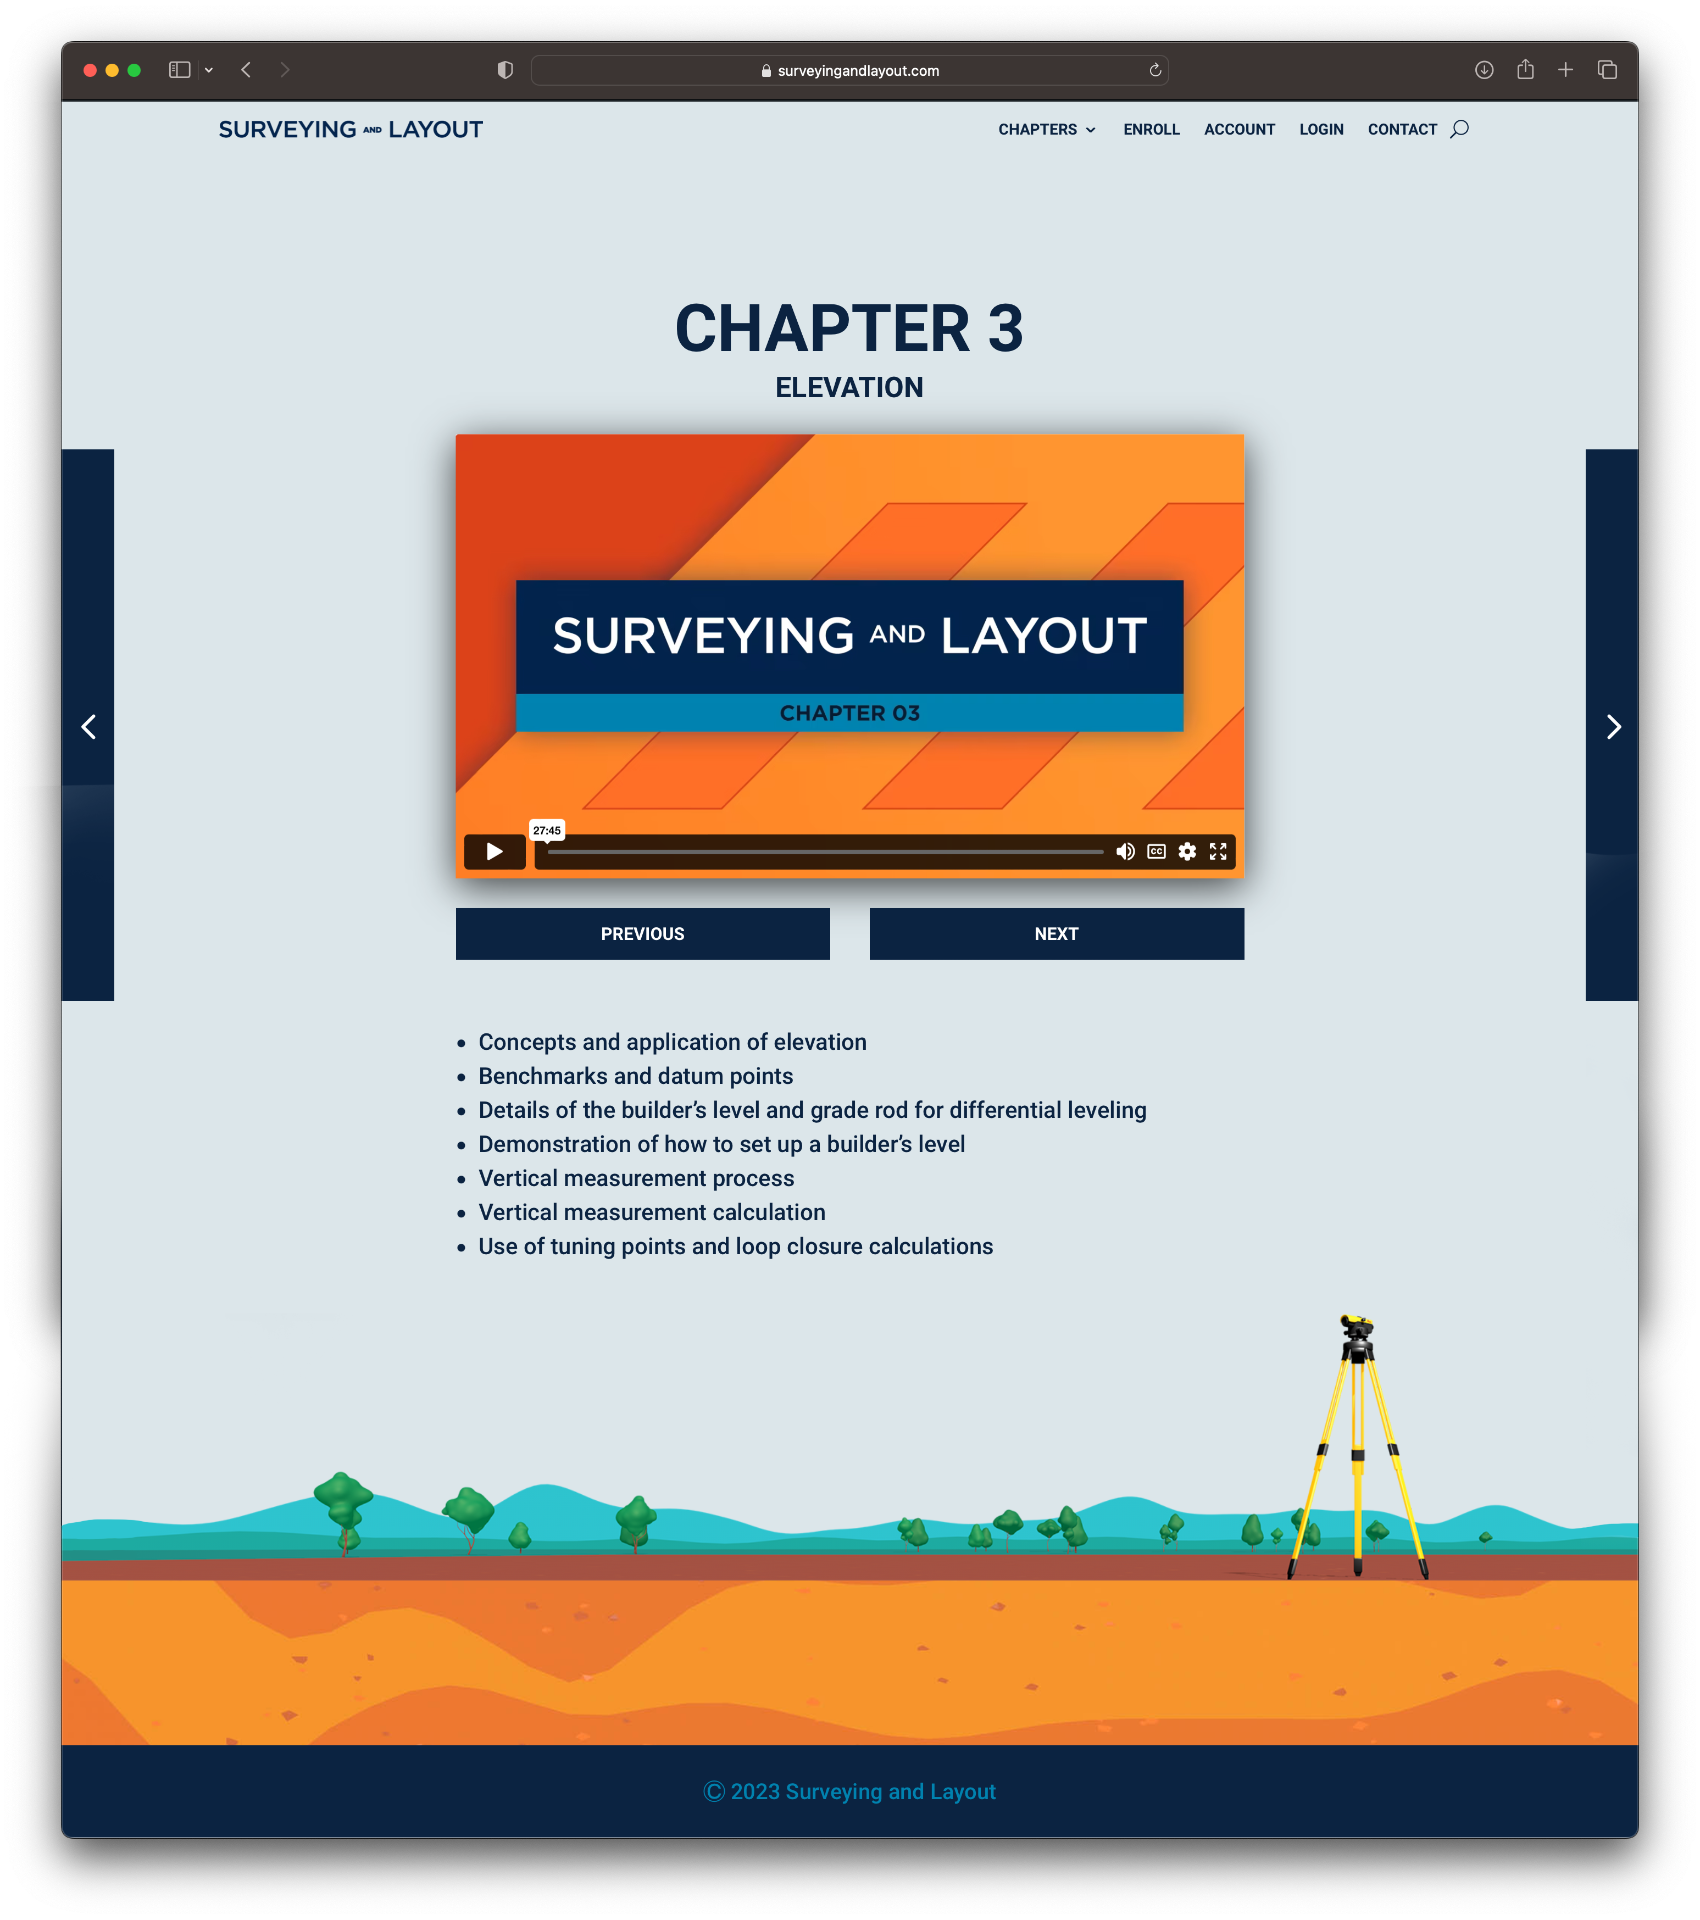 Surveying and Layout Website Chapter 3